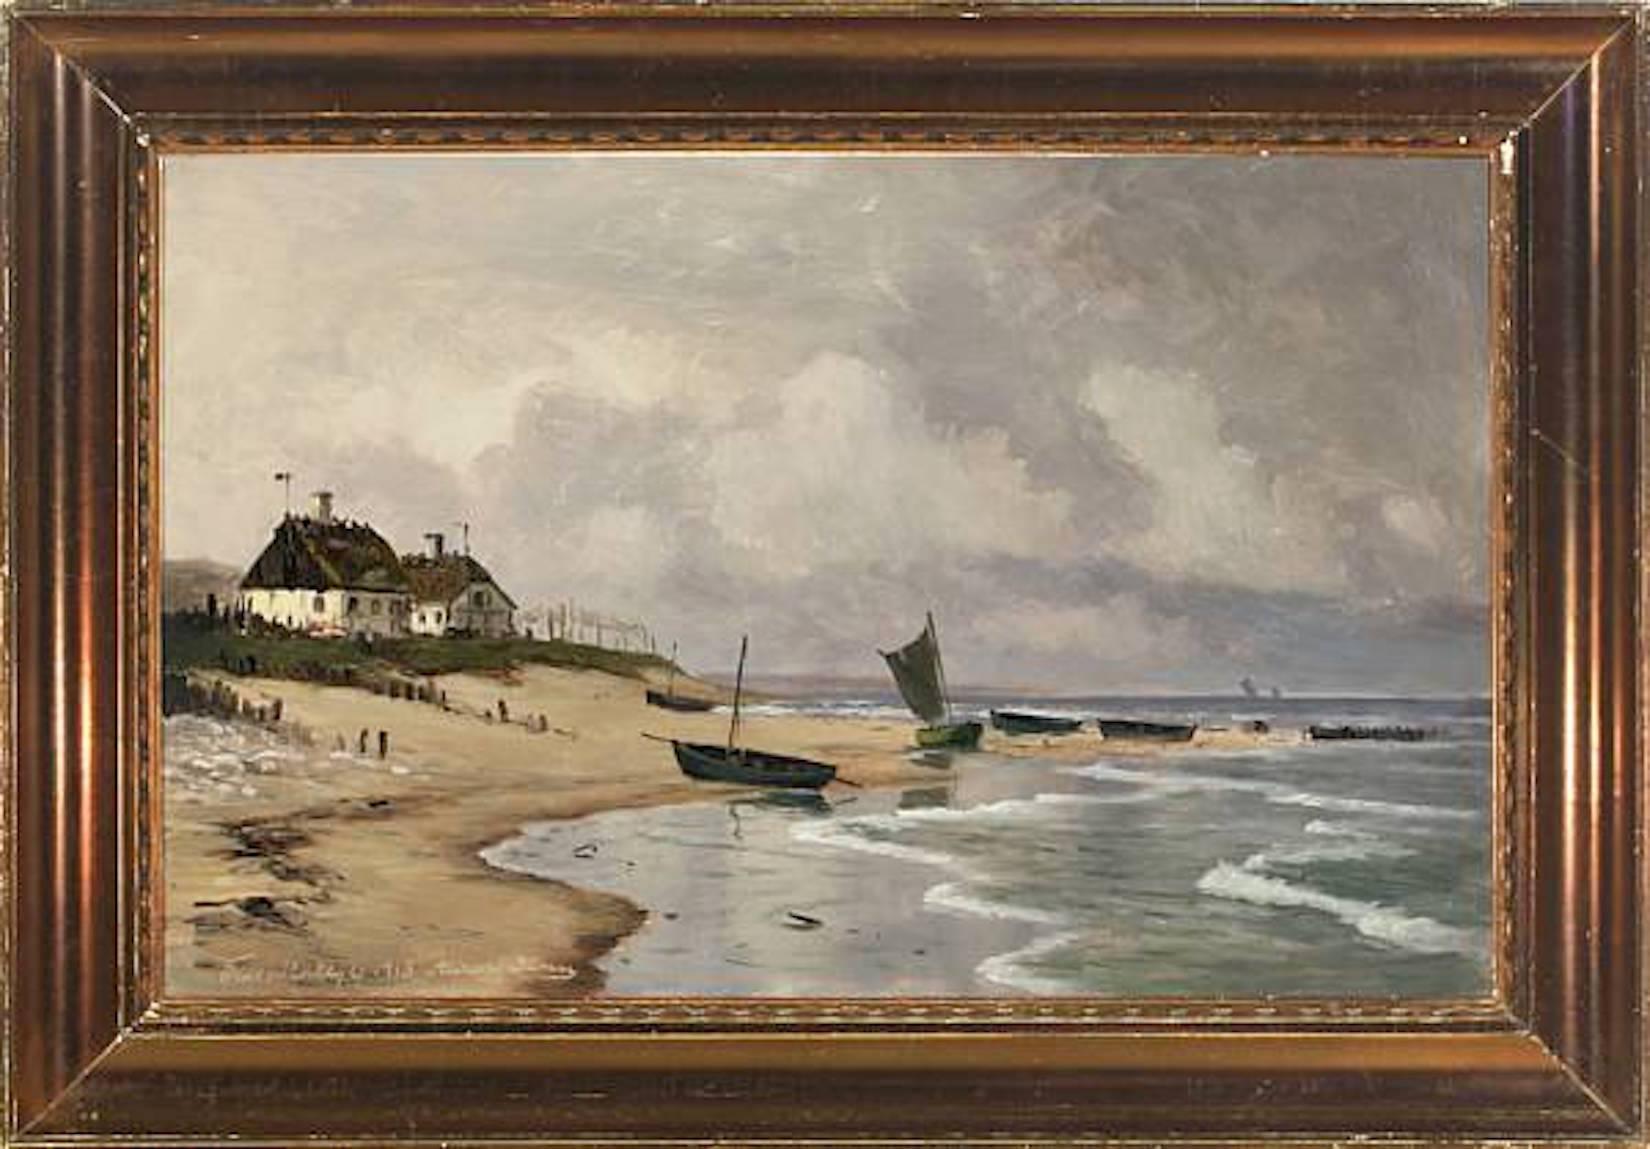 Danish coast with thatched house and boats on the beach. Signed Alfred Olsen 1913 Tidsvildeleje. Oil on canvas. (Tidsvildeleje today is a popular beach town on the coast north of Copenhagen).